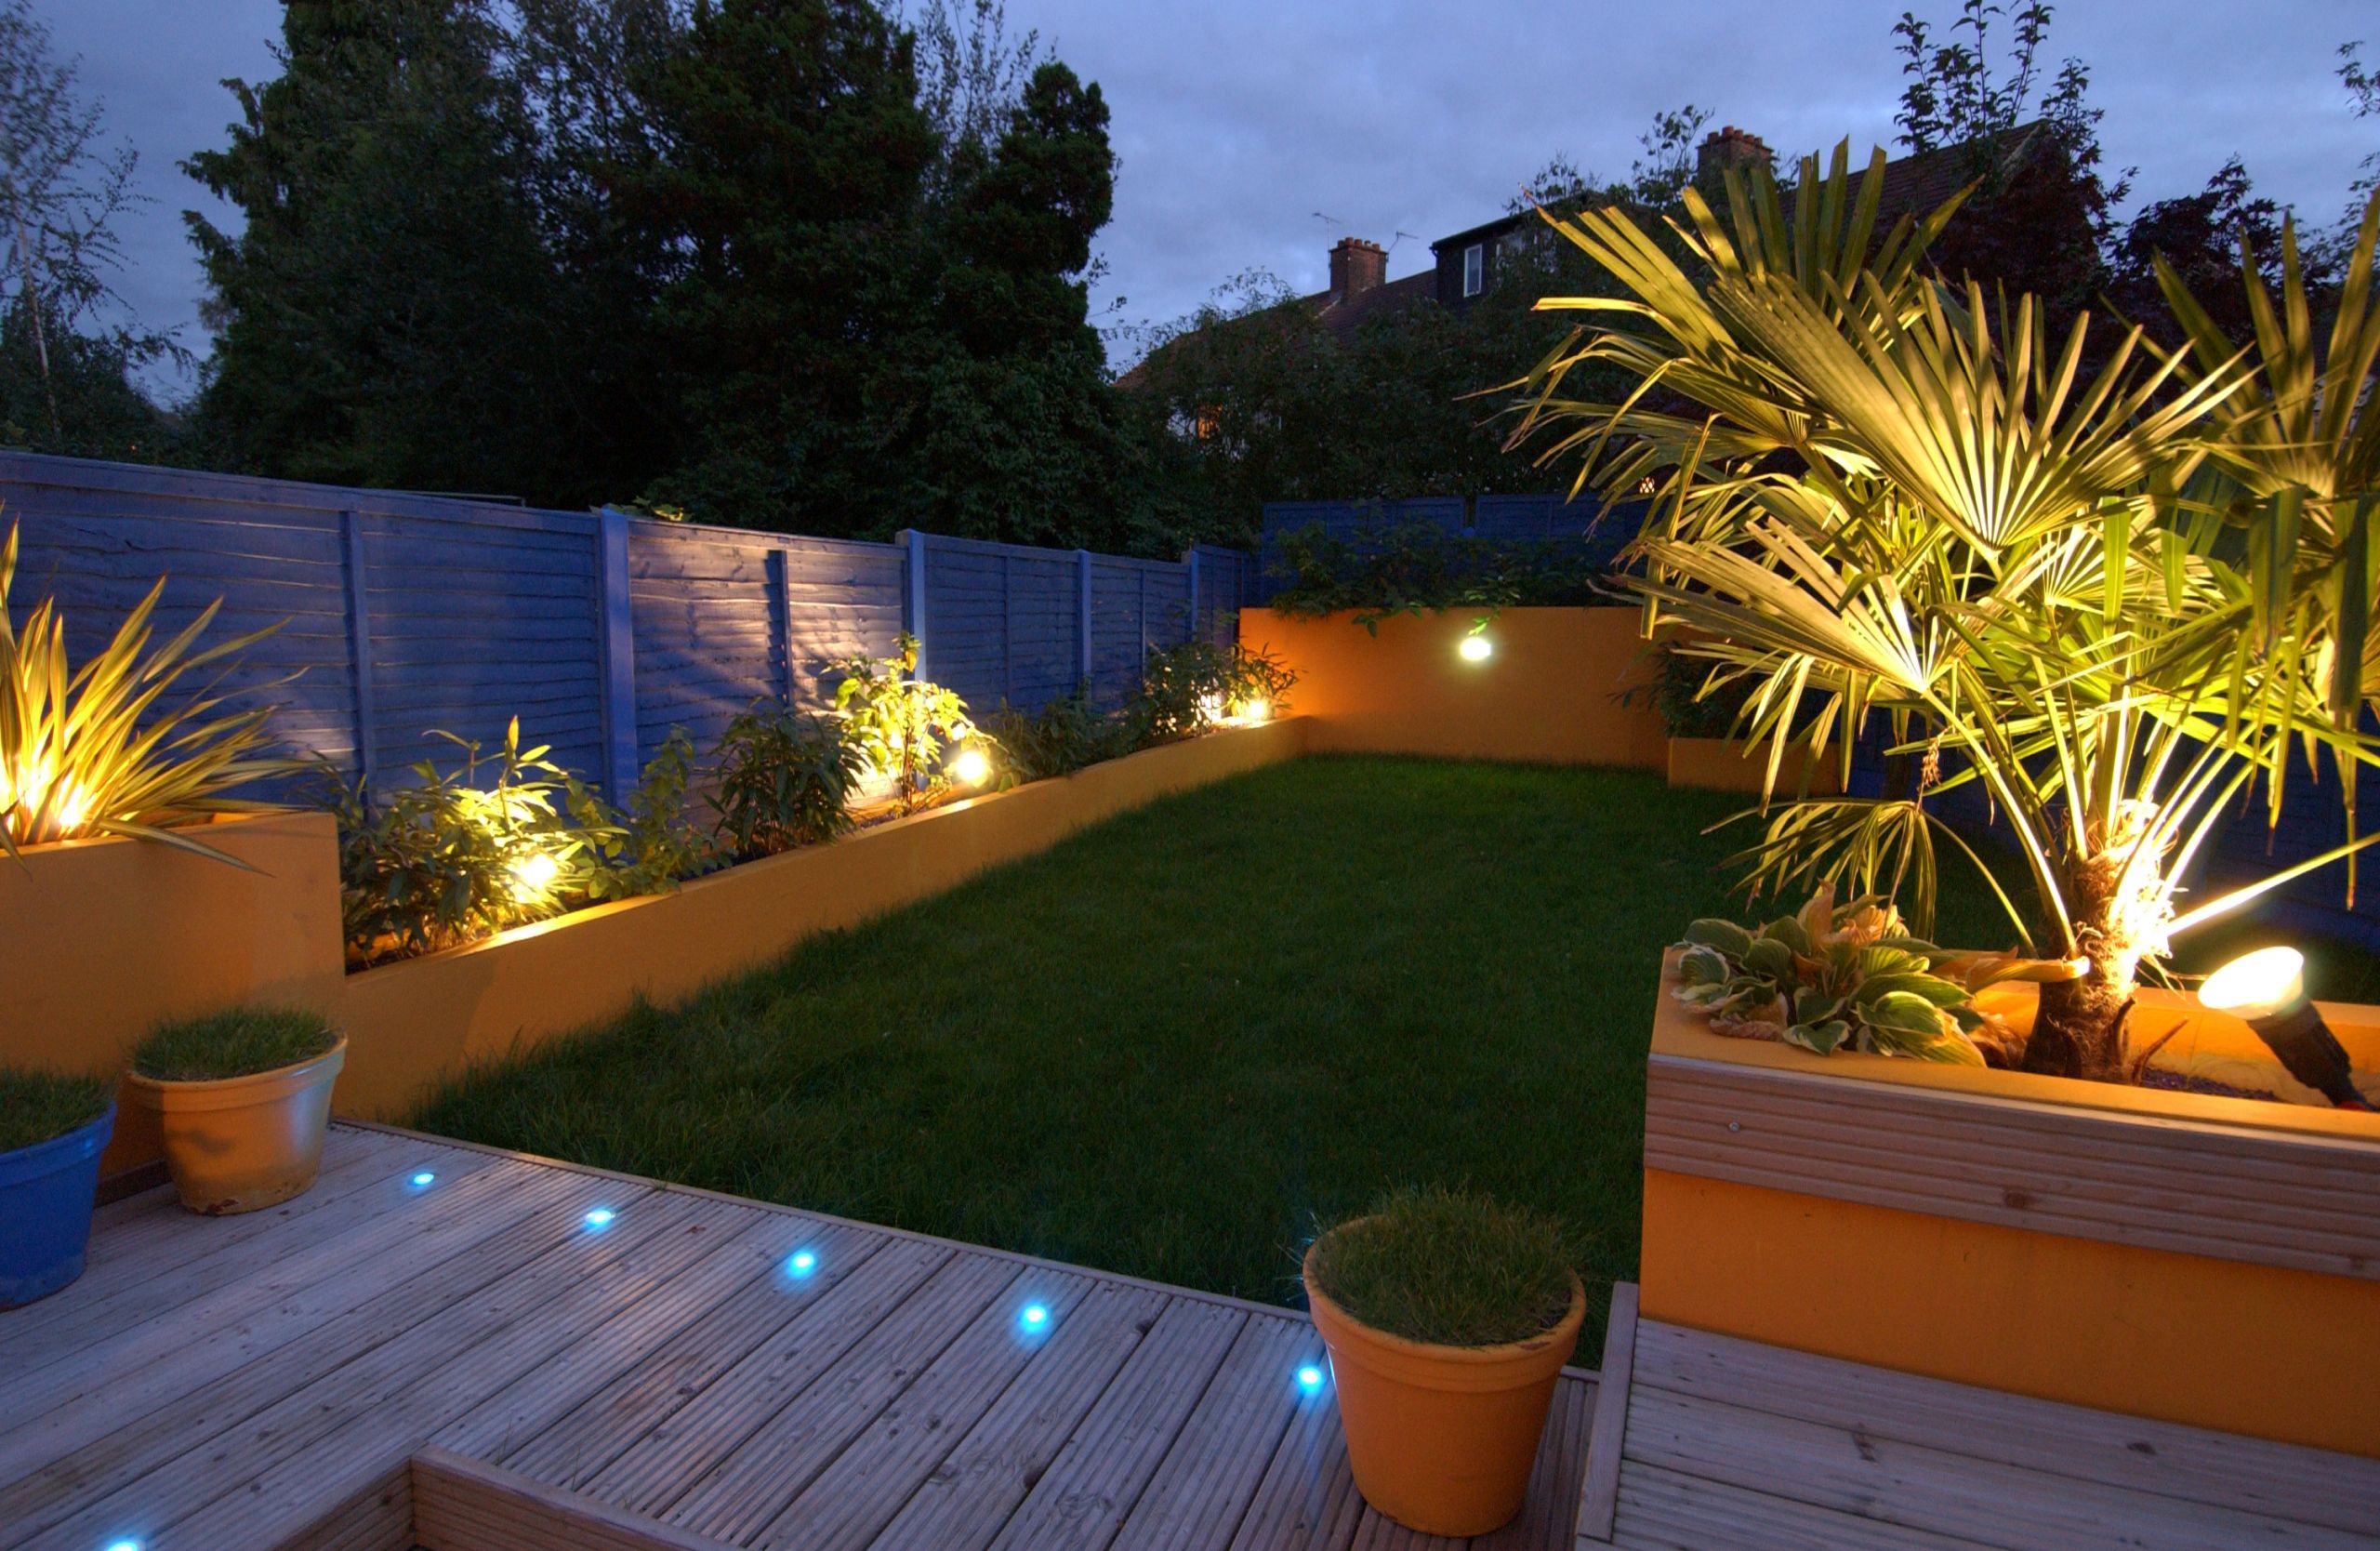 Patio Landscape Lighting
 Garden Lighting Making the most of your summer evenings